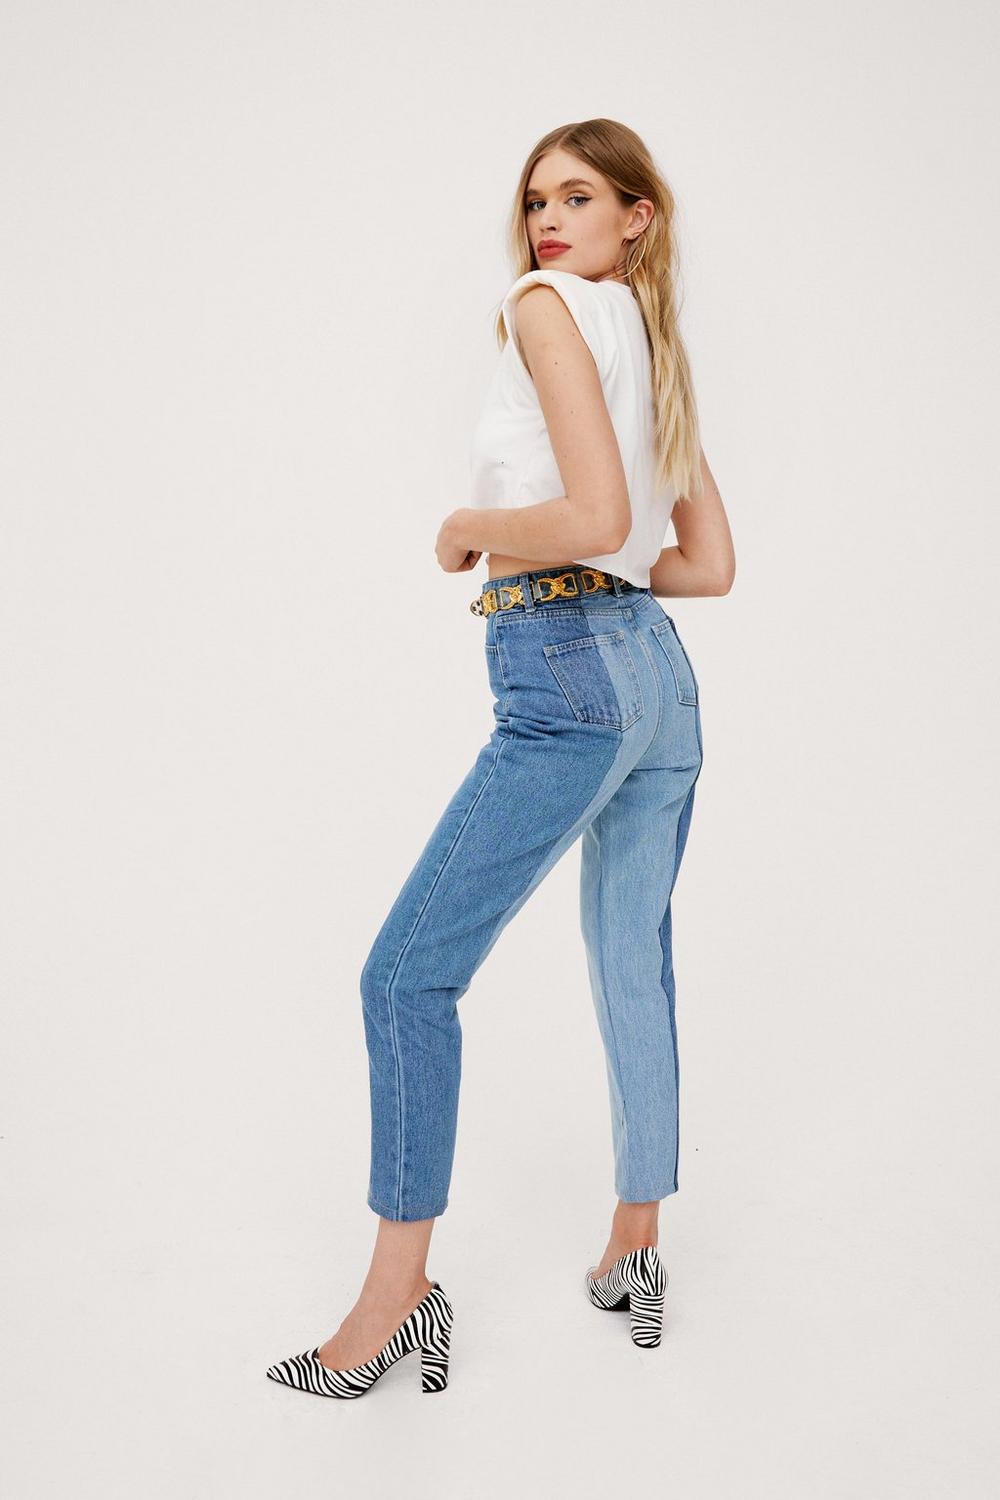 Two Tones Straight Leg Jeans from Jeans collection you can buy now from Fashion And Icon online shop